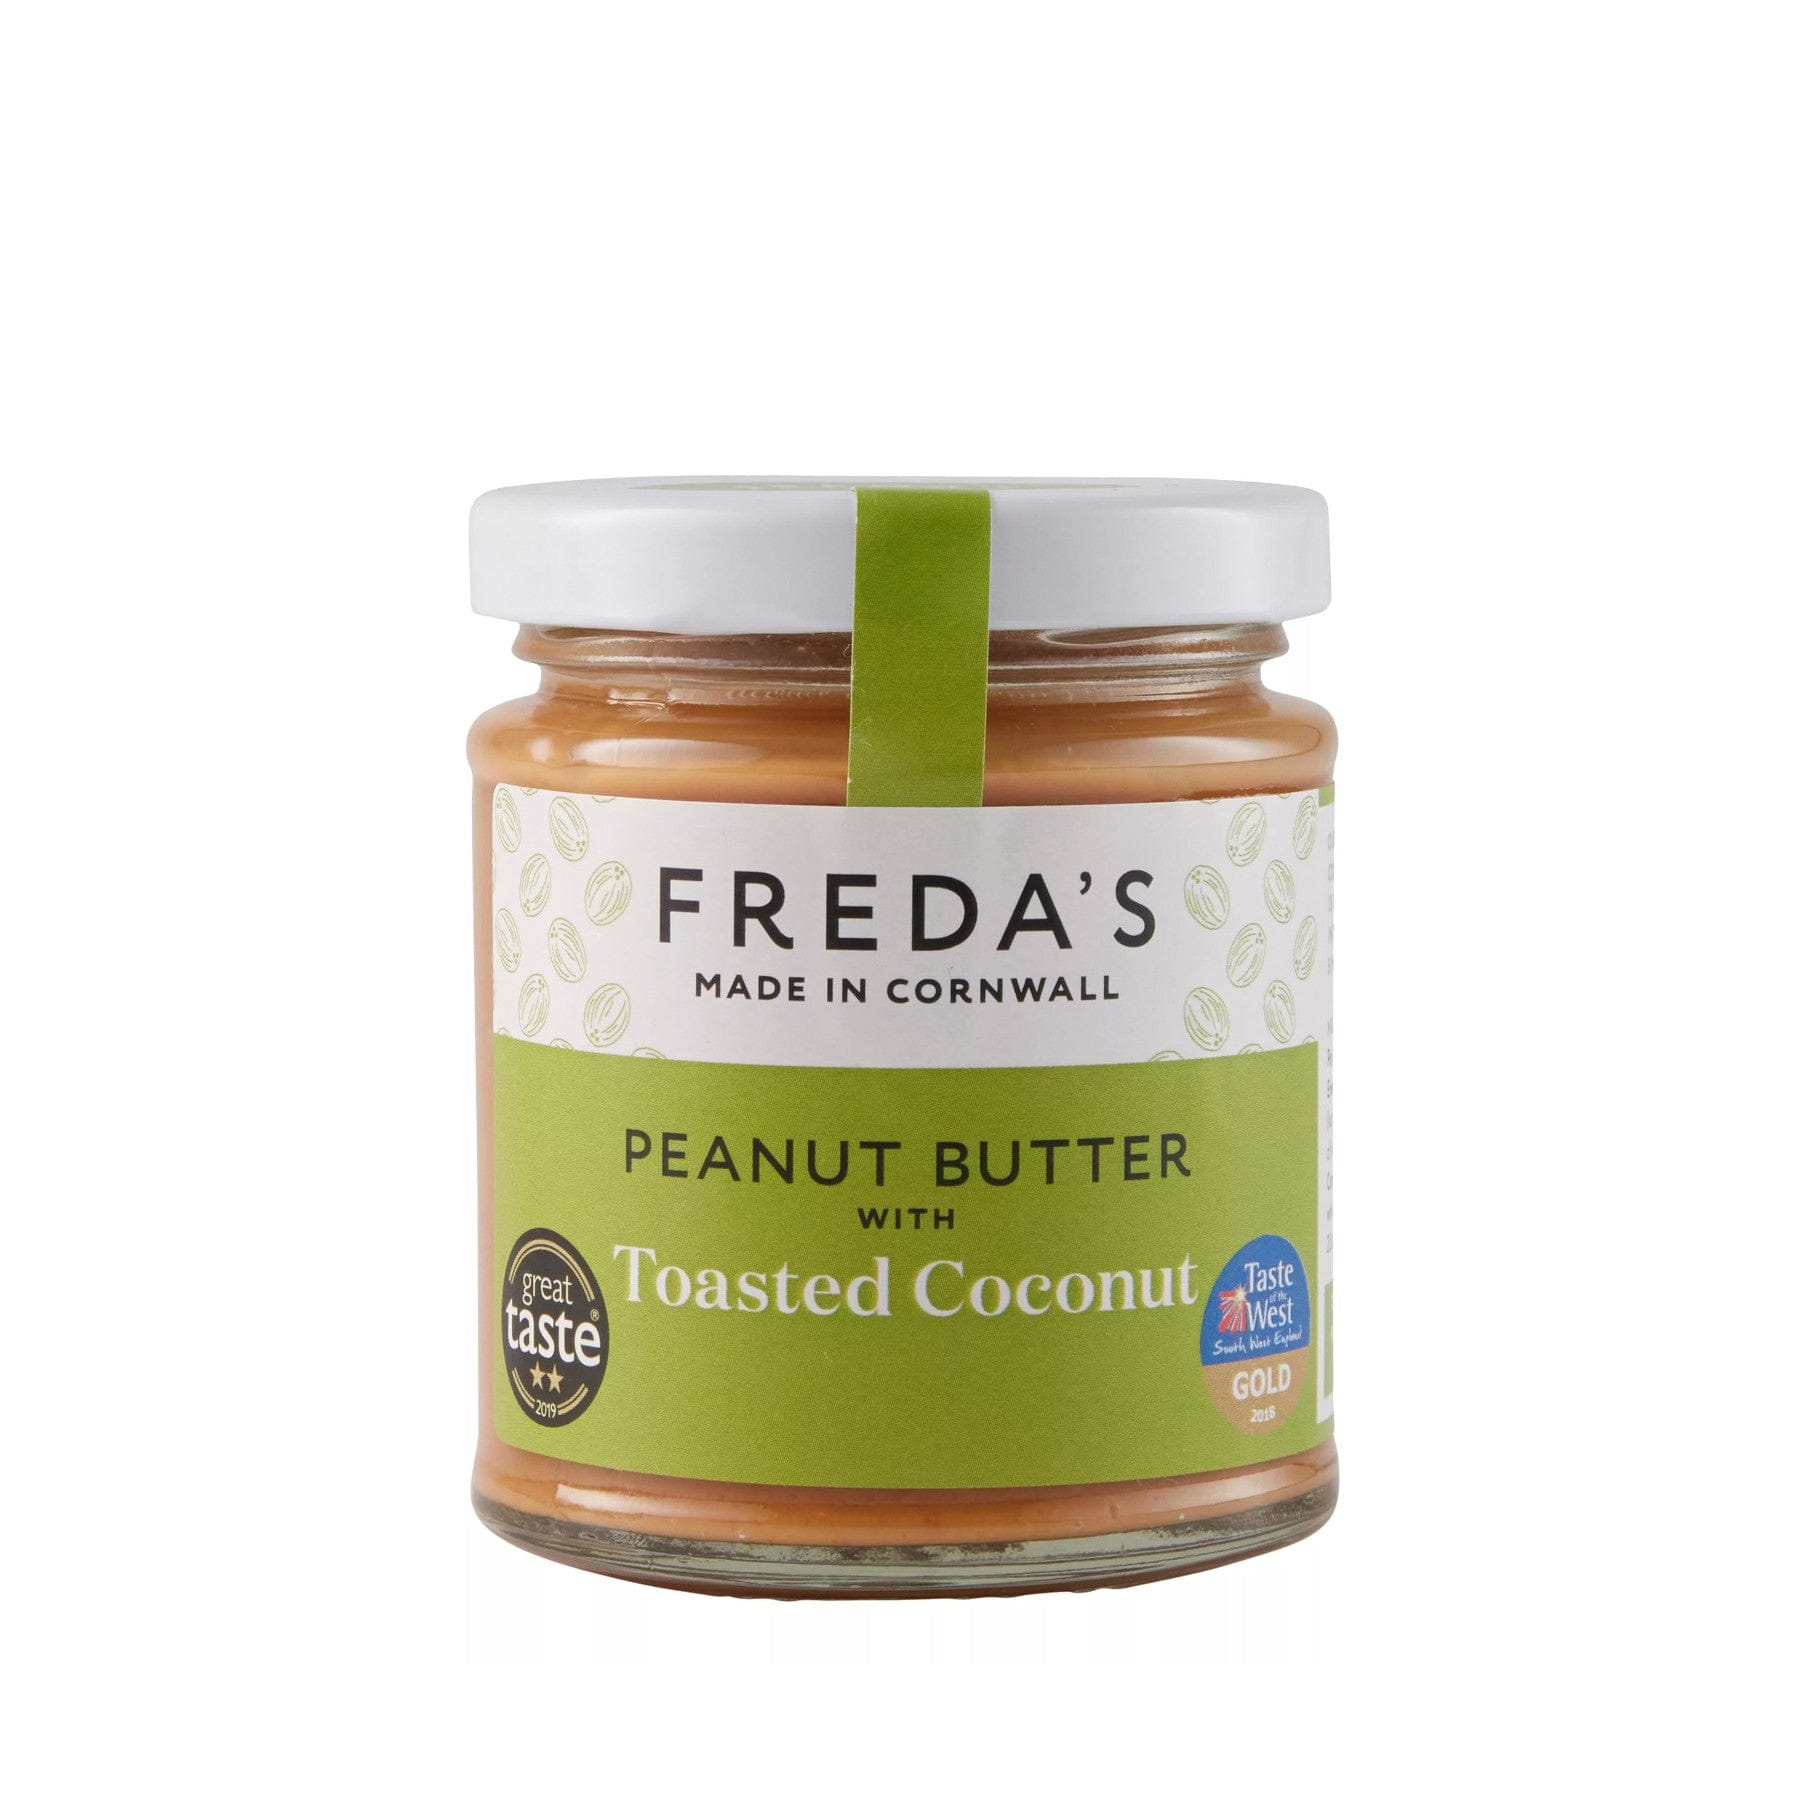 Freda's made in Cornwall peanut butter with toasted coconut jar, Great Taste Award gold winner badge, isolated on white background